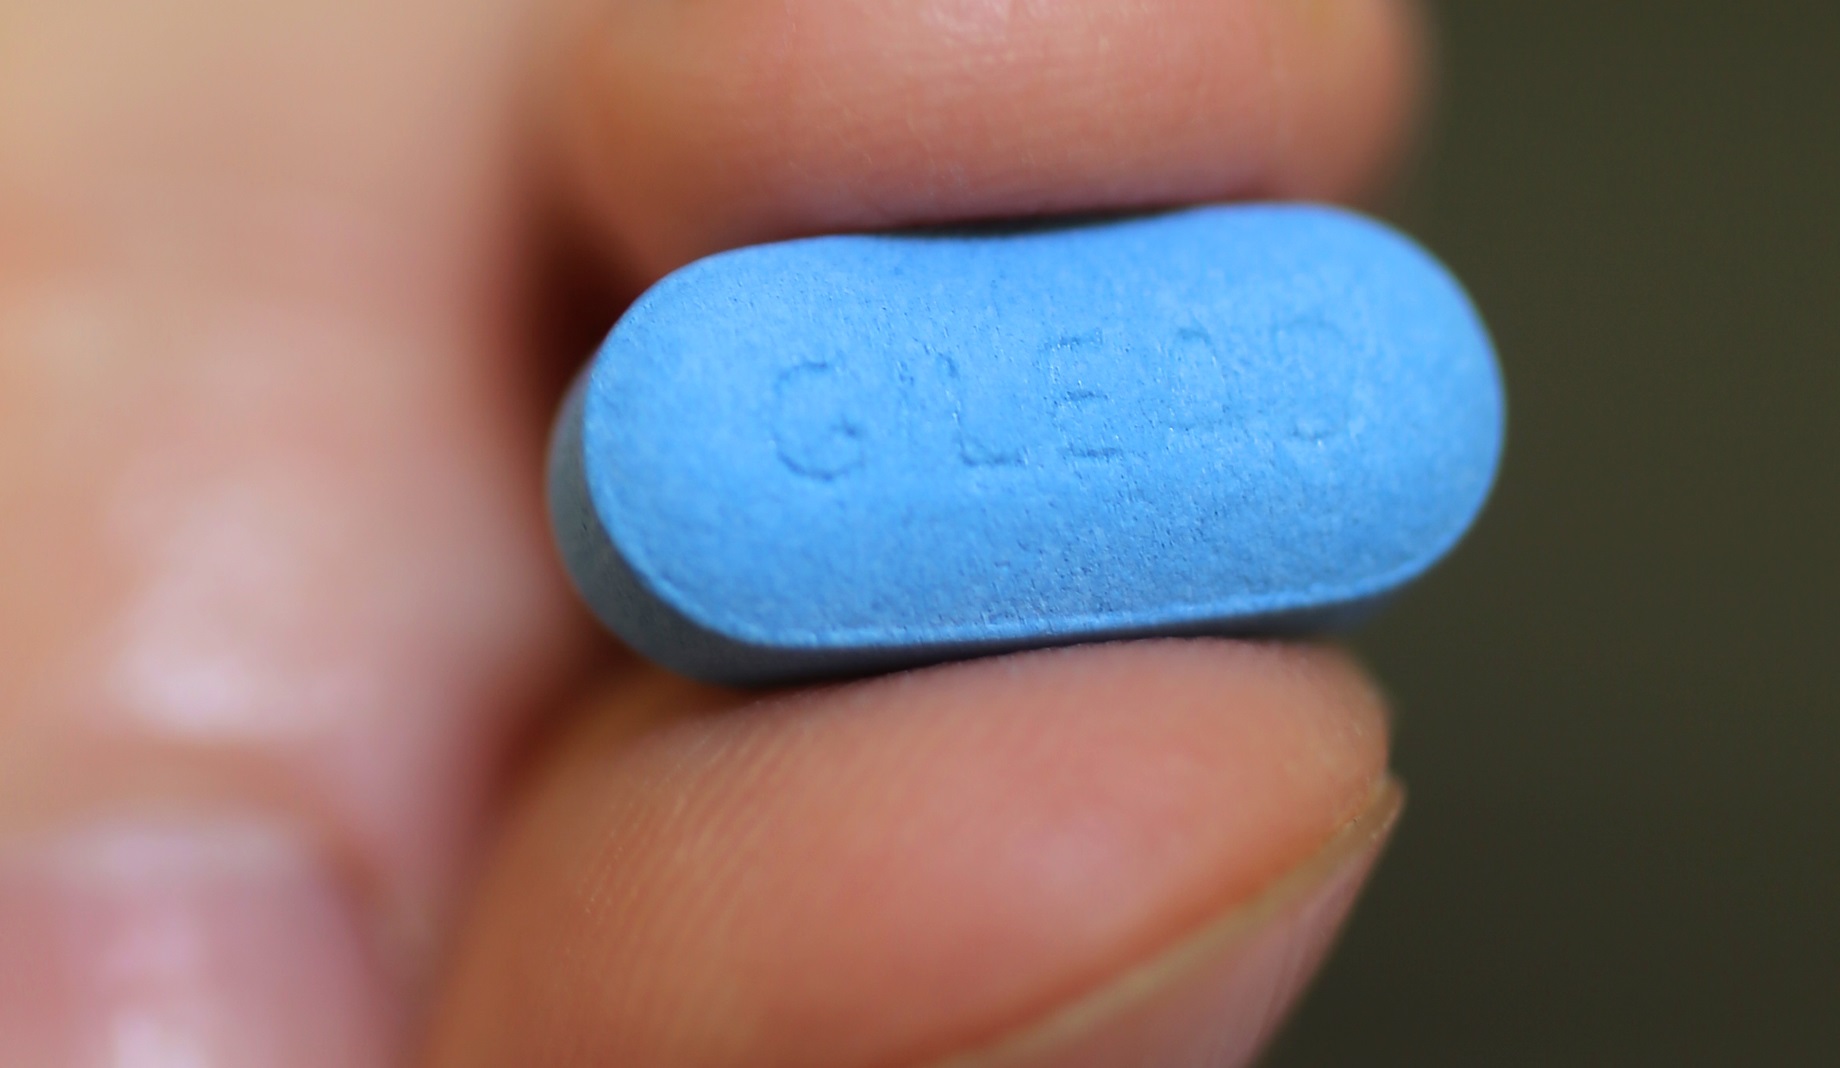 2010s: HIV-preventing PrEP drugs will be made available for free in the US